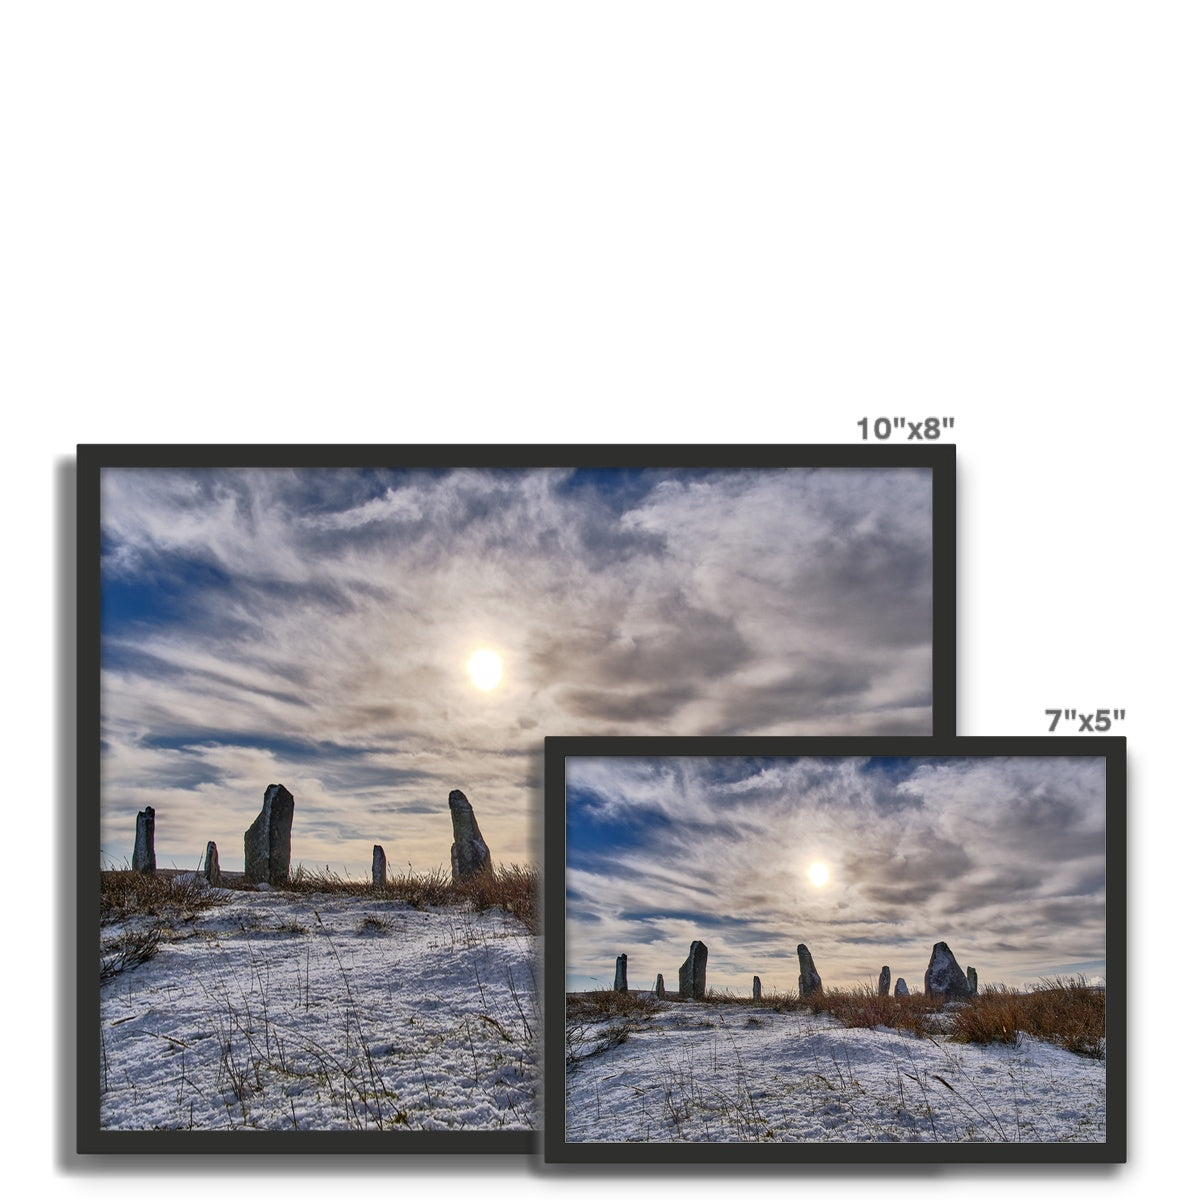 Cnoc Fillibhir Bheag/Callanish III in snow and sunshine Framed Photo Tile